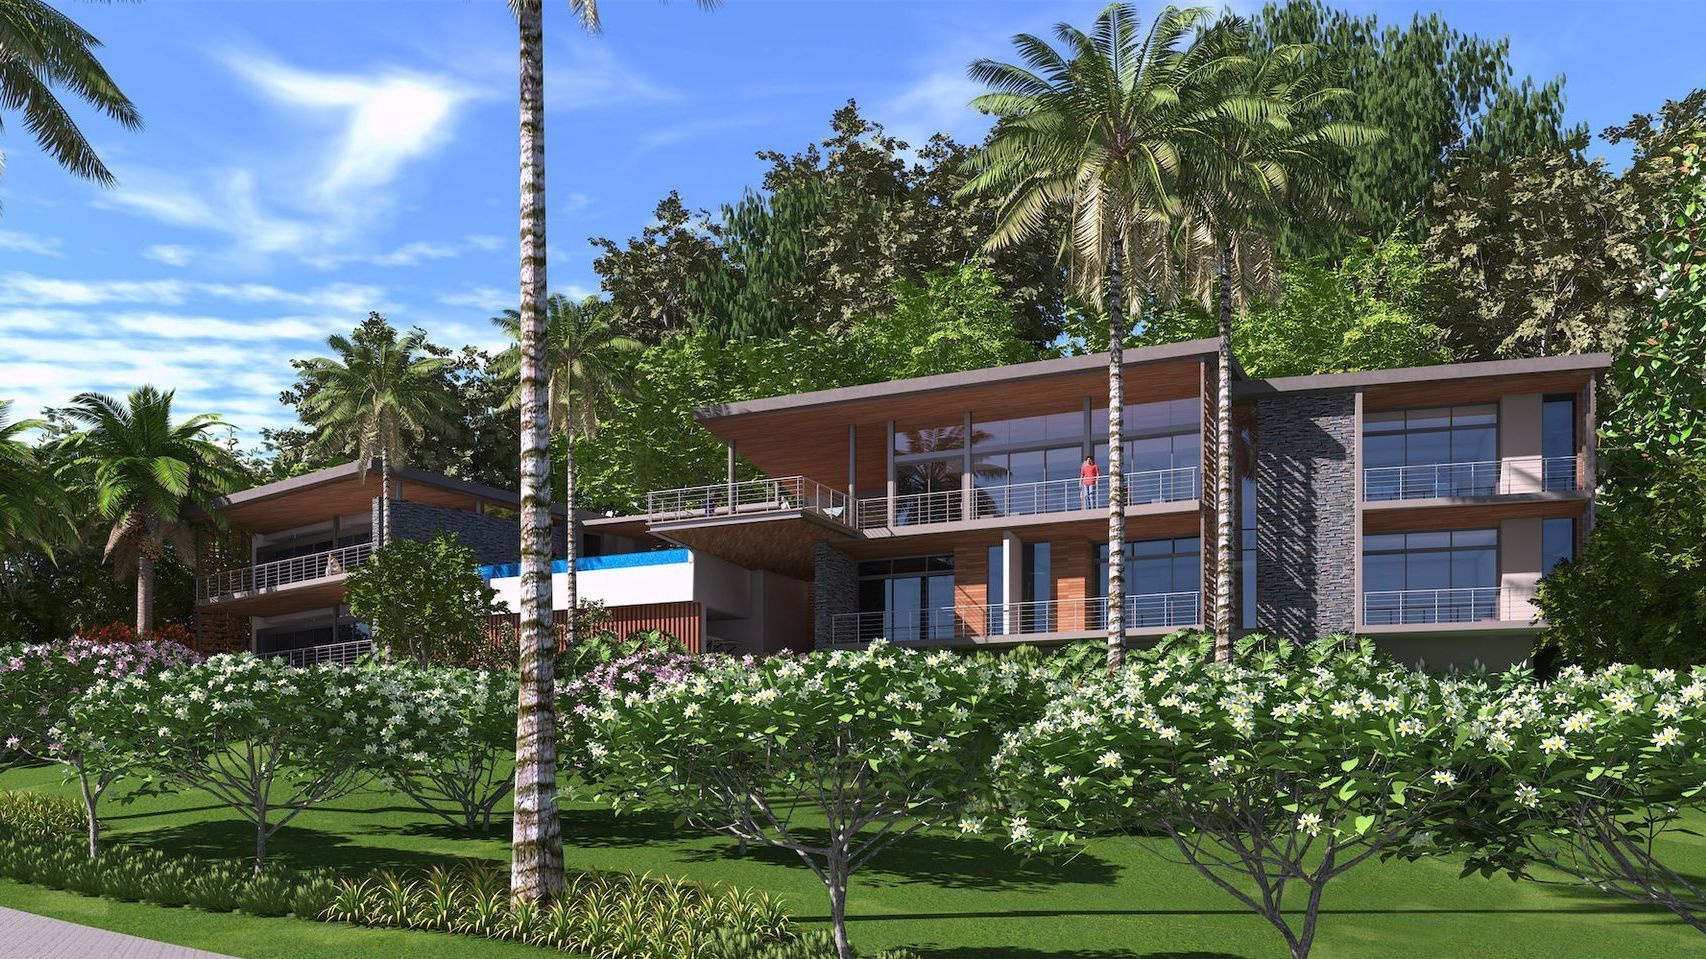 A rendering of the cap limon resort in costa rica surrounded by palm trees